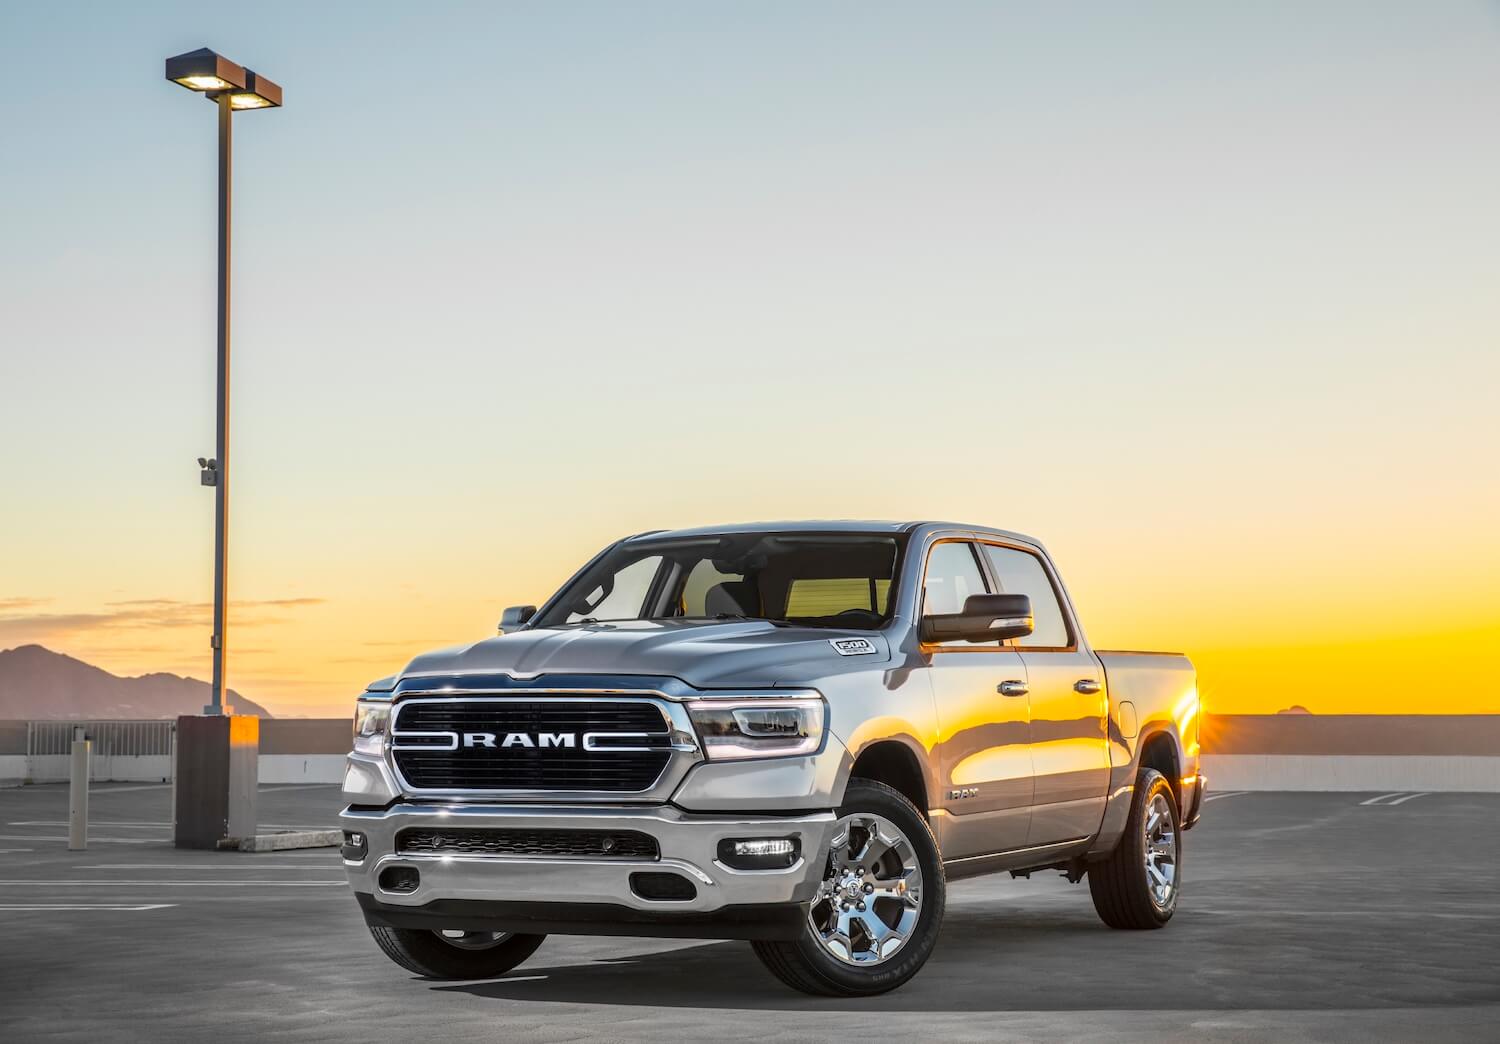 The 2023 Ram 1500 parked on pavement at dusk